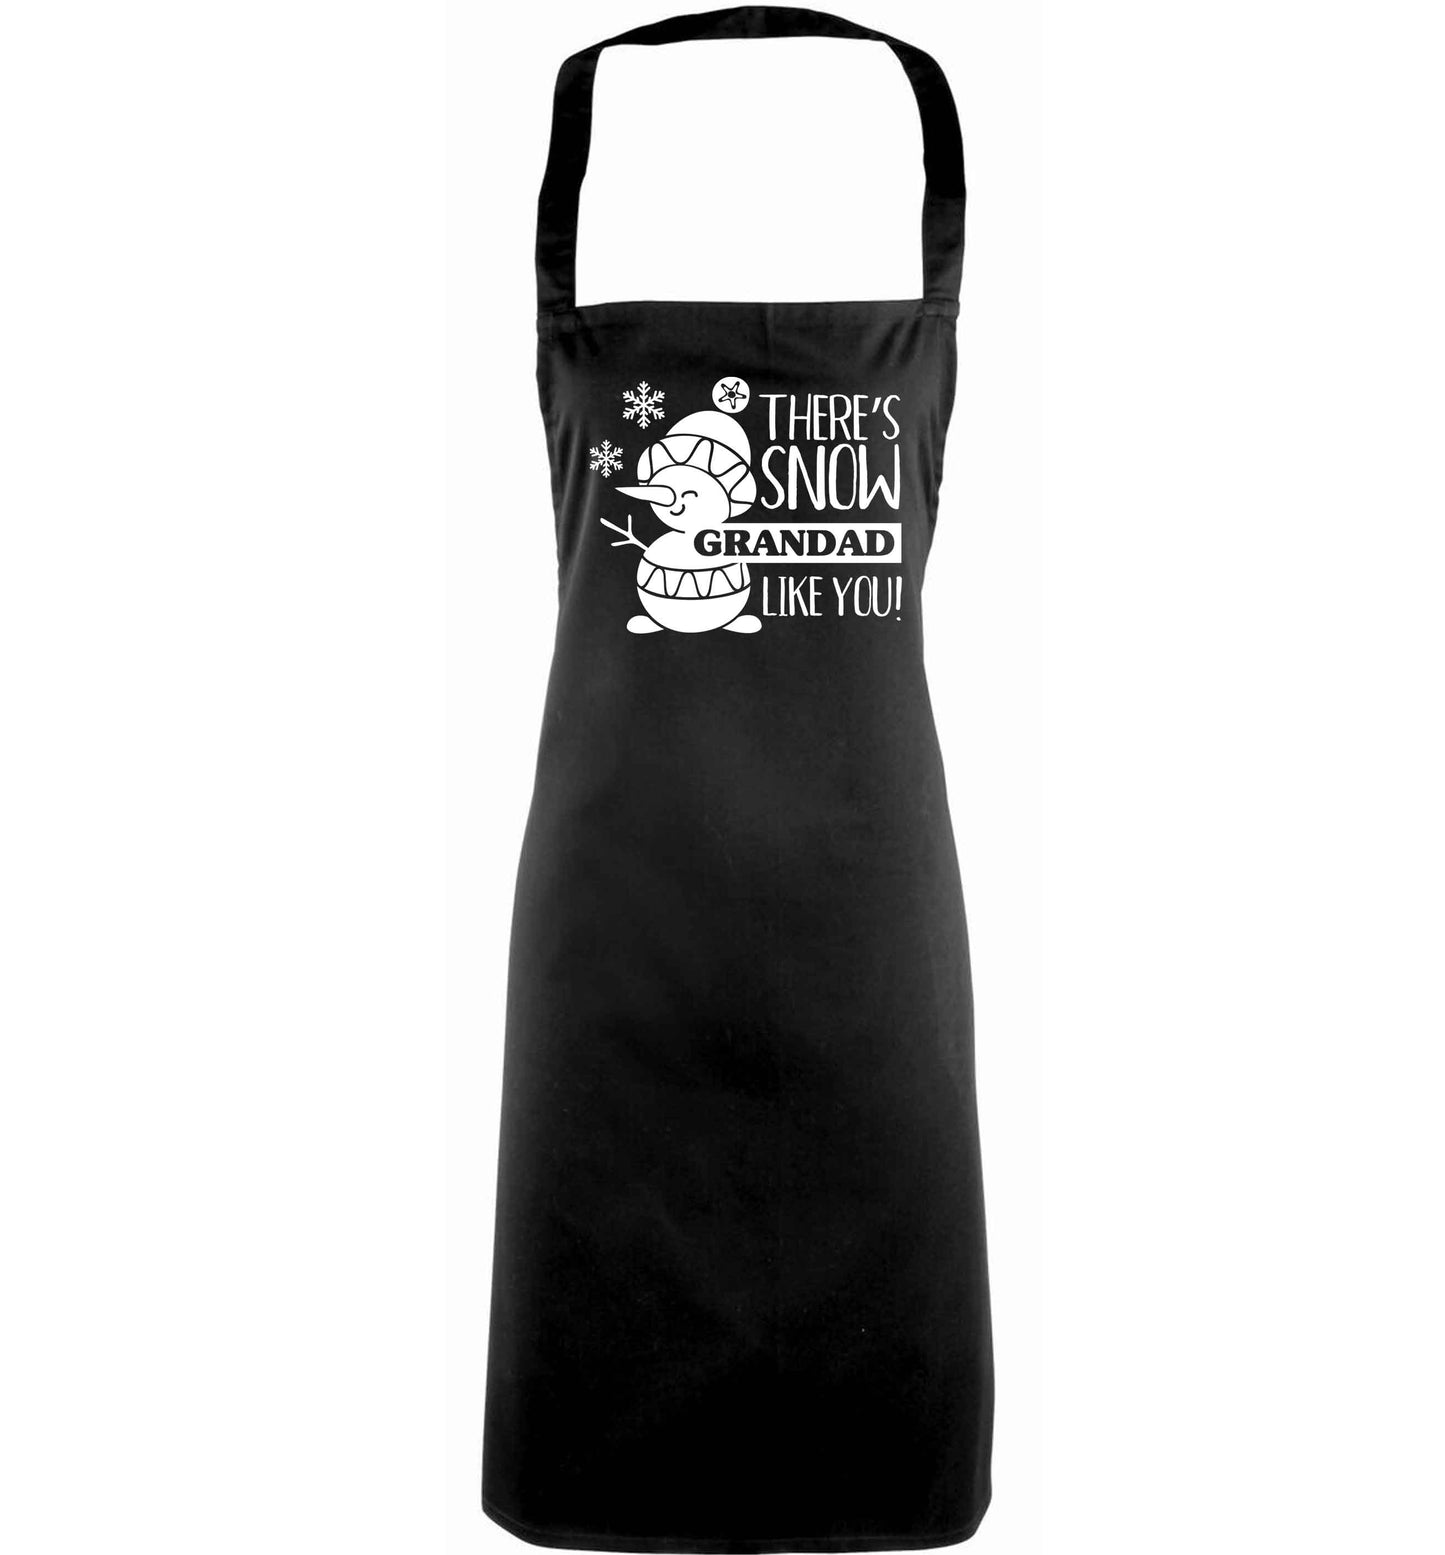 There's snow grandad like you adults black apron